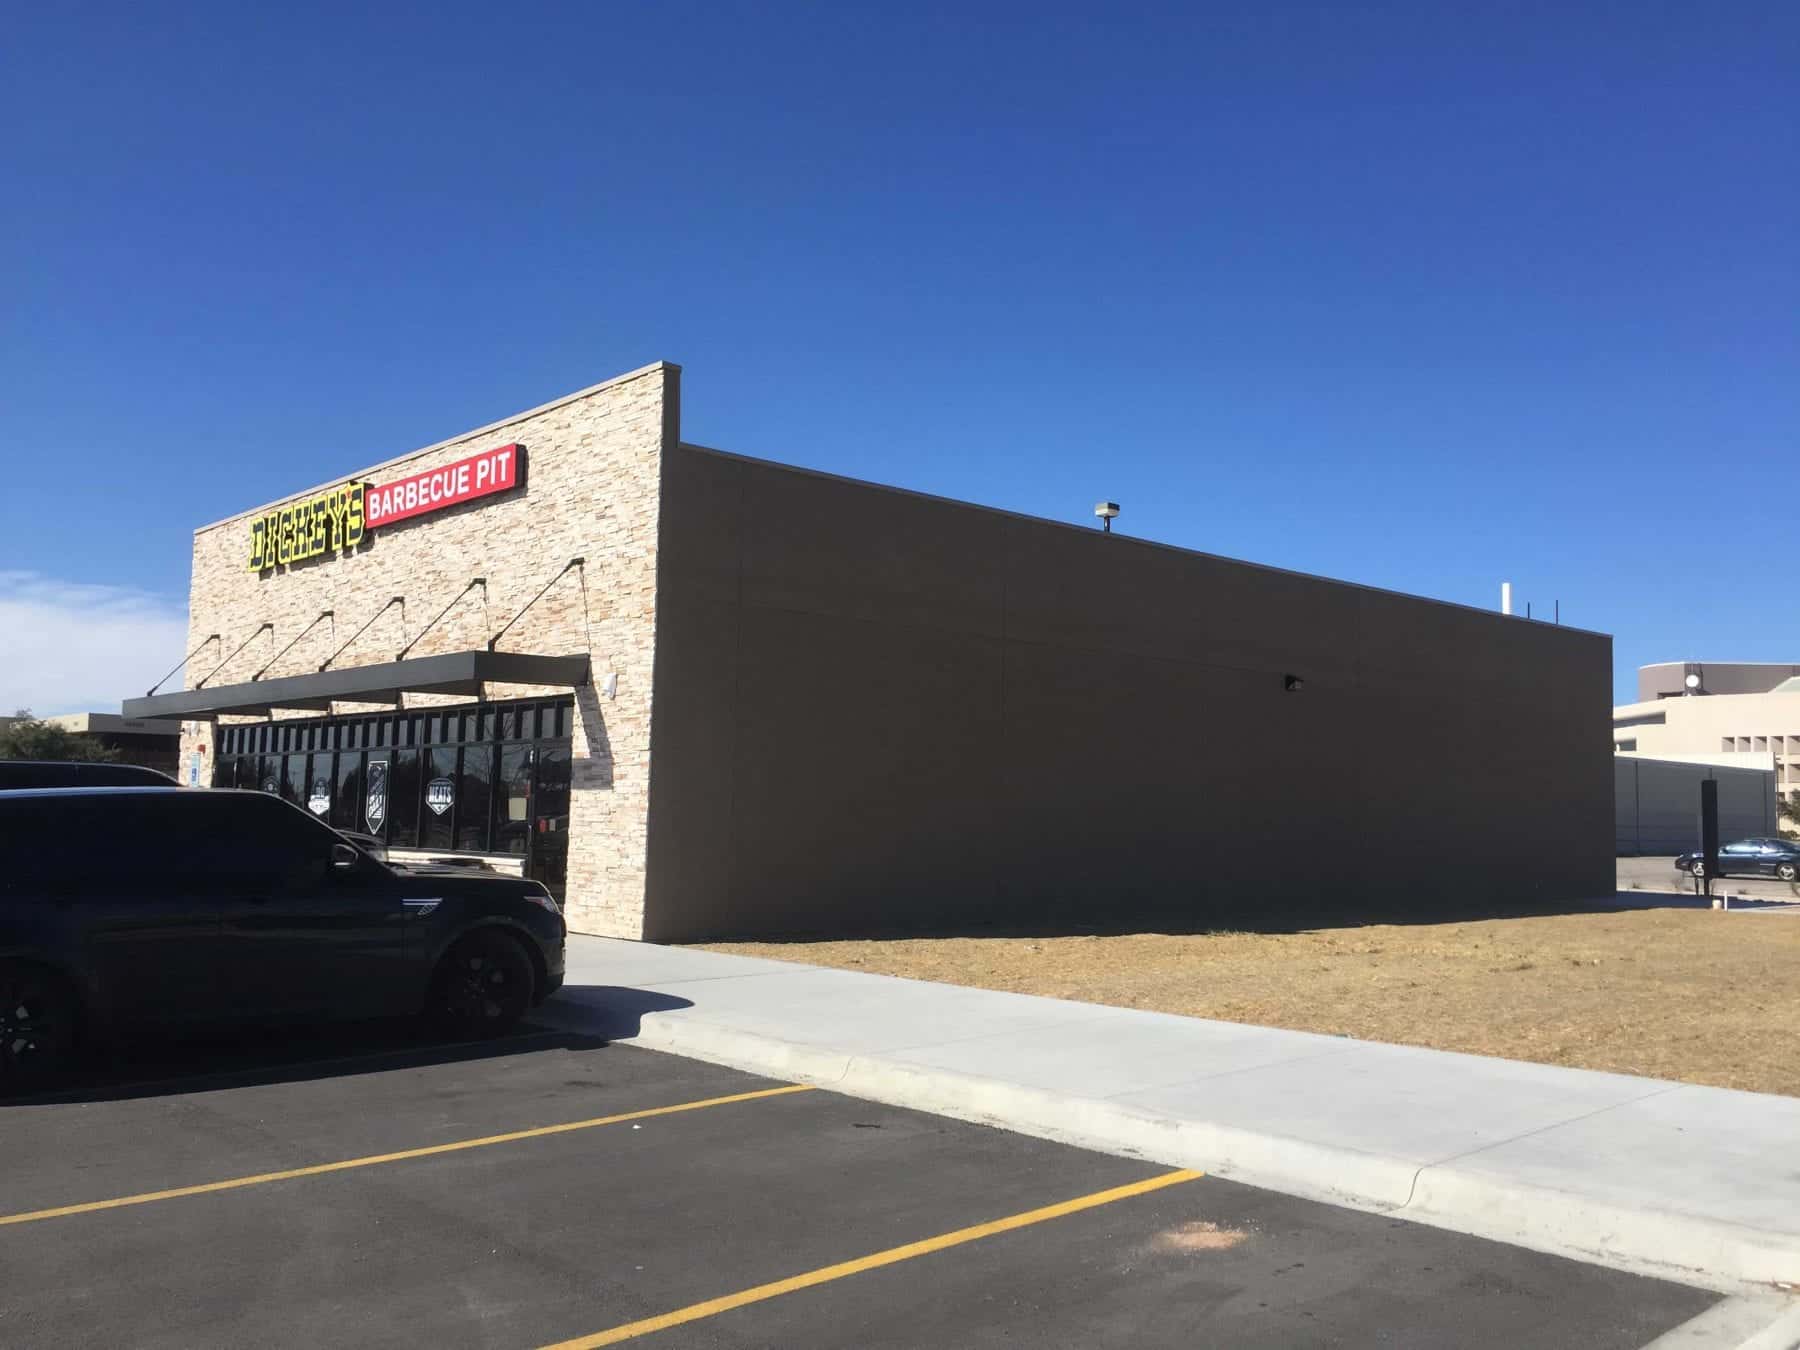 Dickey's Barbecue Pit Exterior Side Renovation by JFA Construction LLC